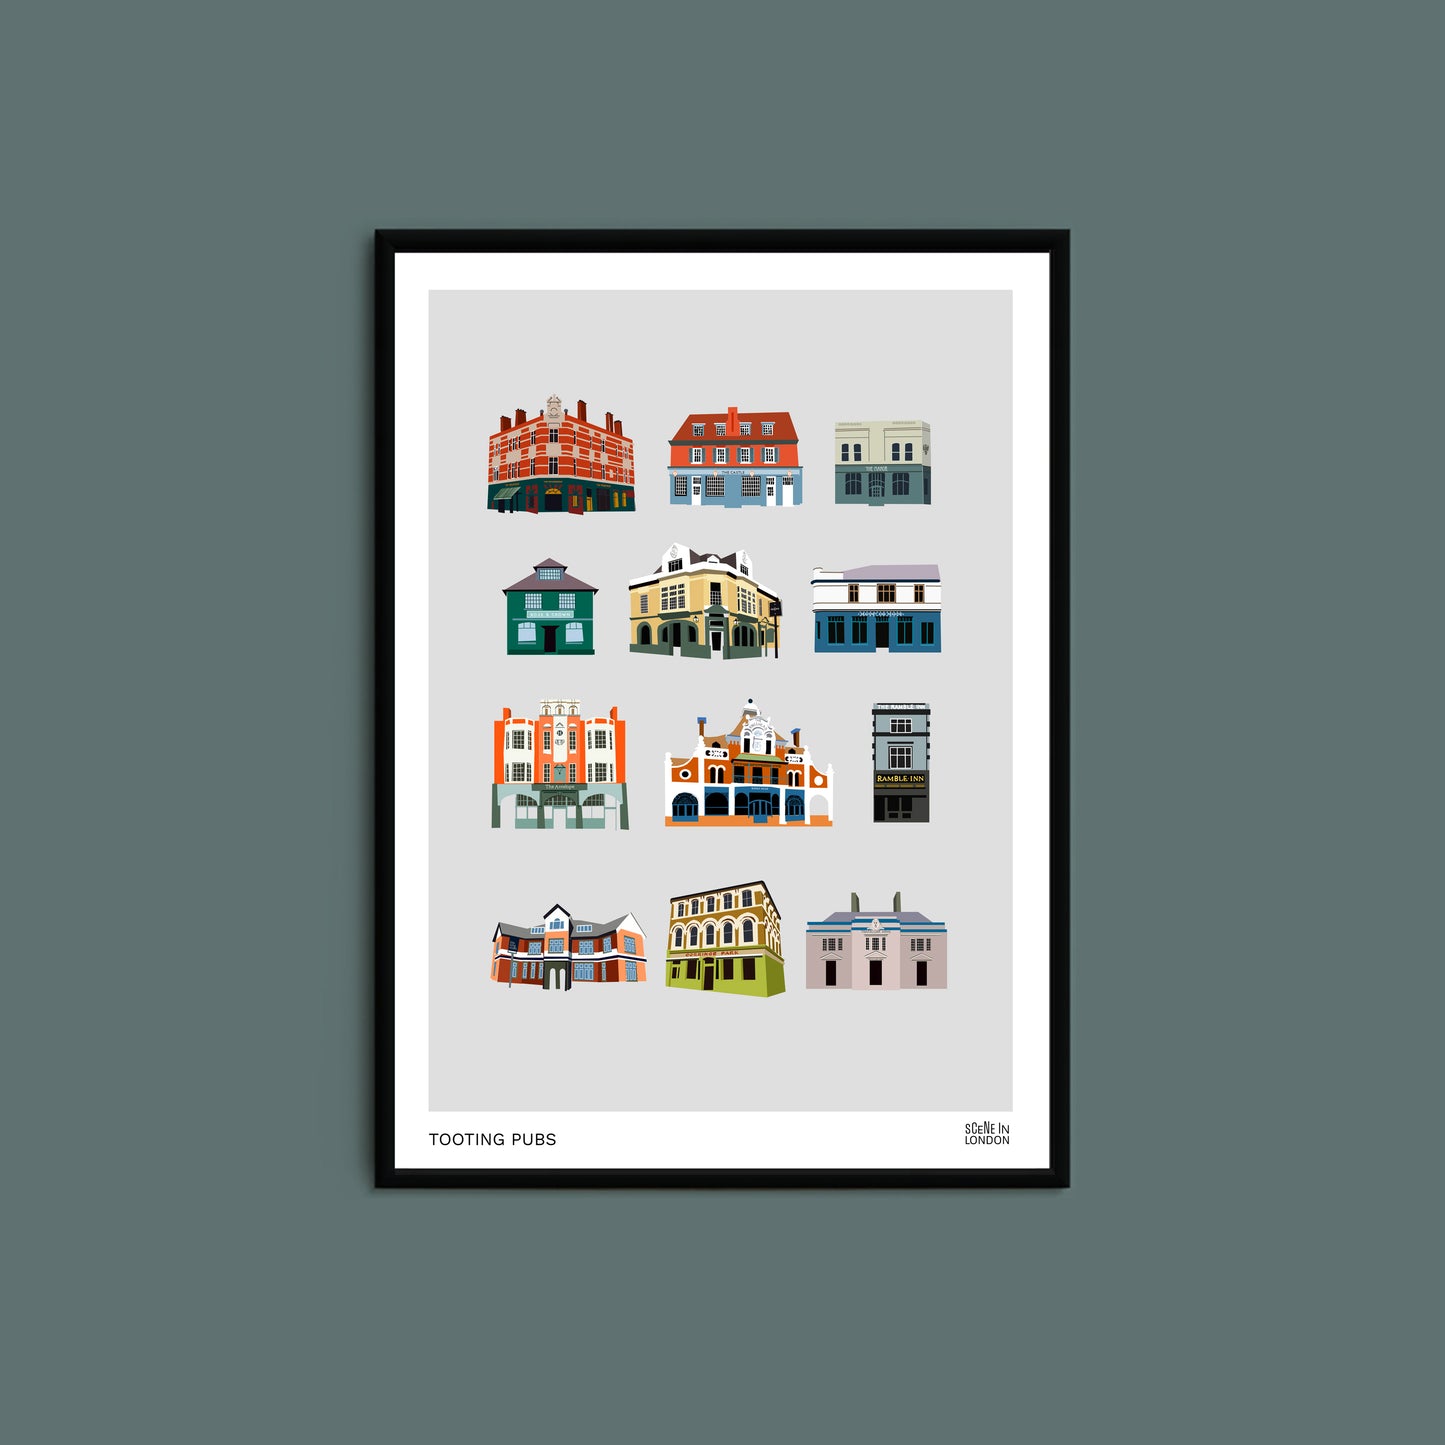 Tooting print featuring pubs in Tooting, London